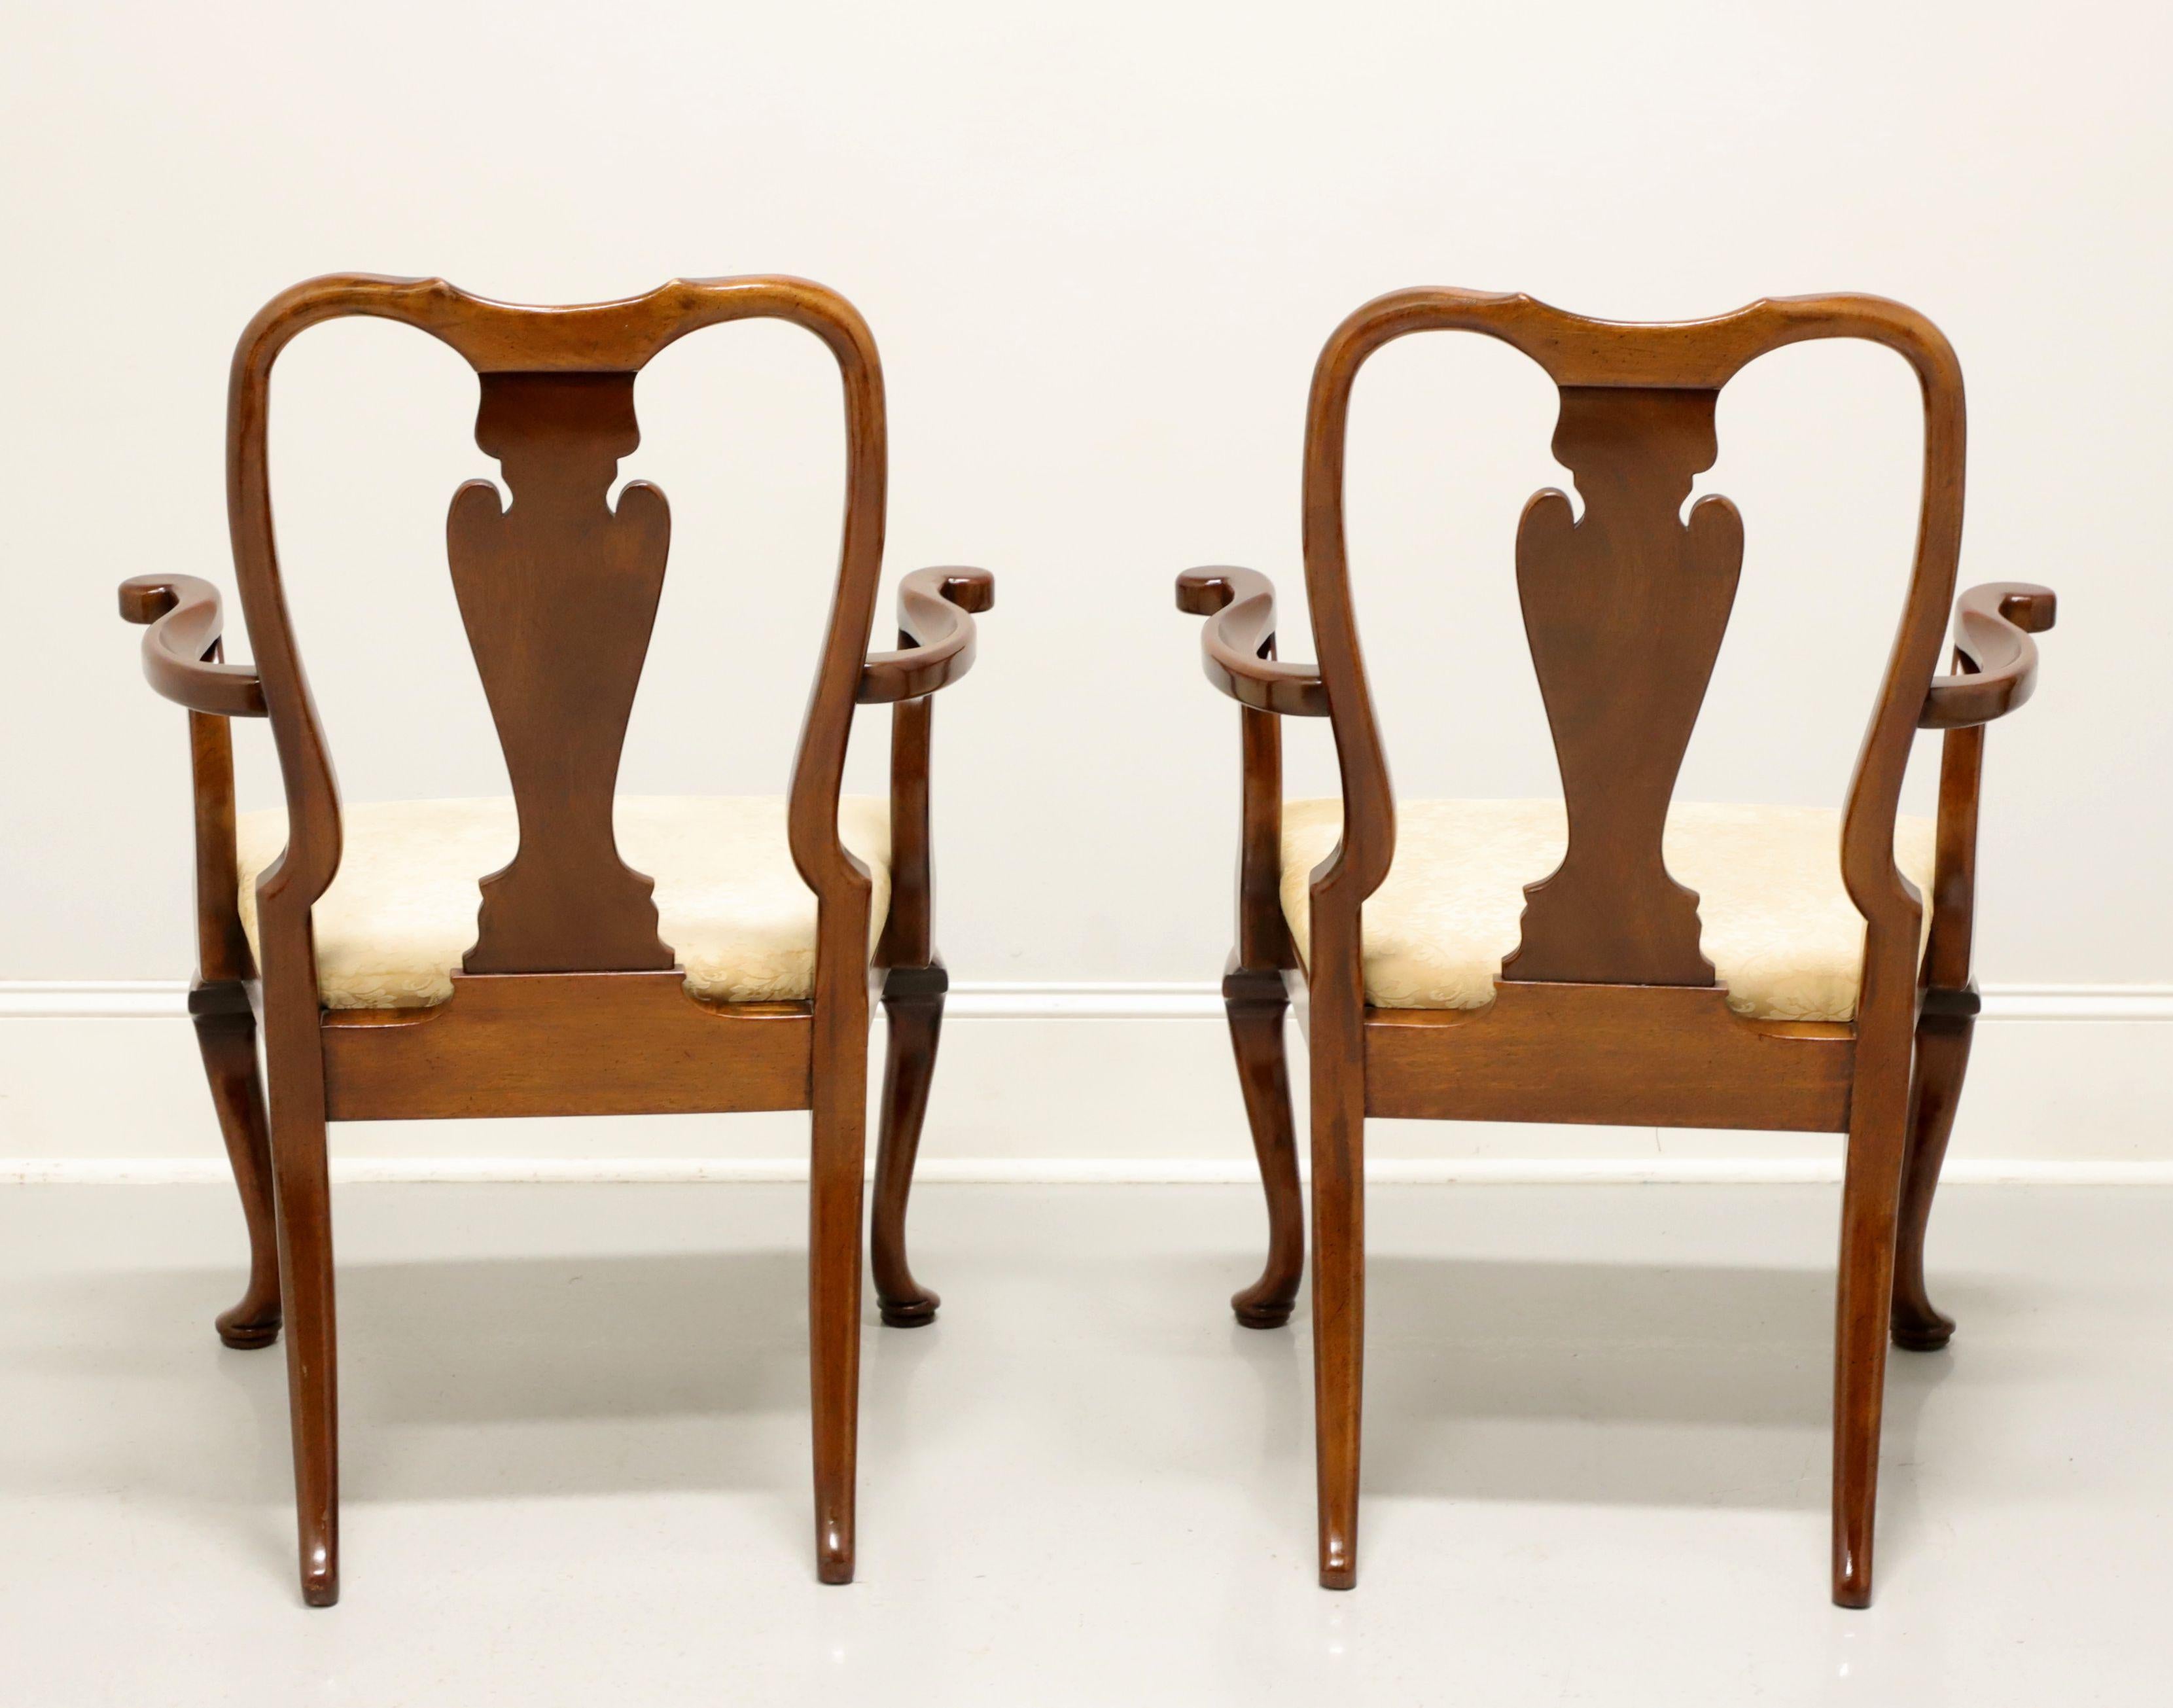 20th Century HICKORY CHAIR Amber Mahogany Queen Anne Dining Armchairs - Pair